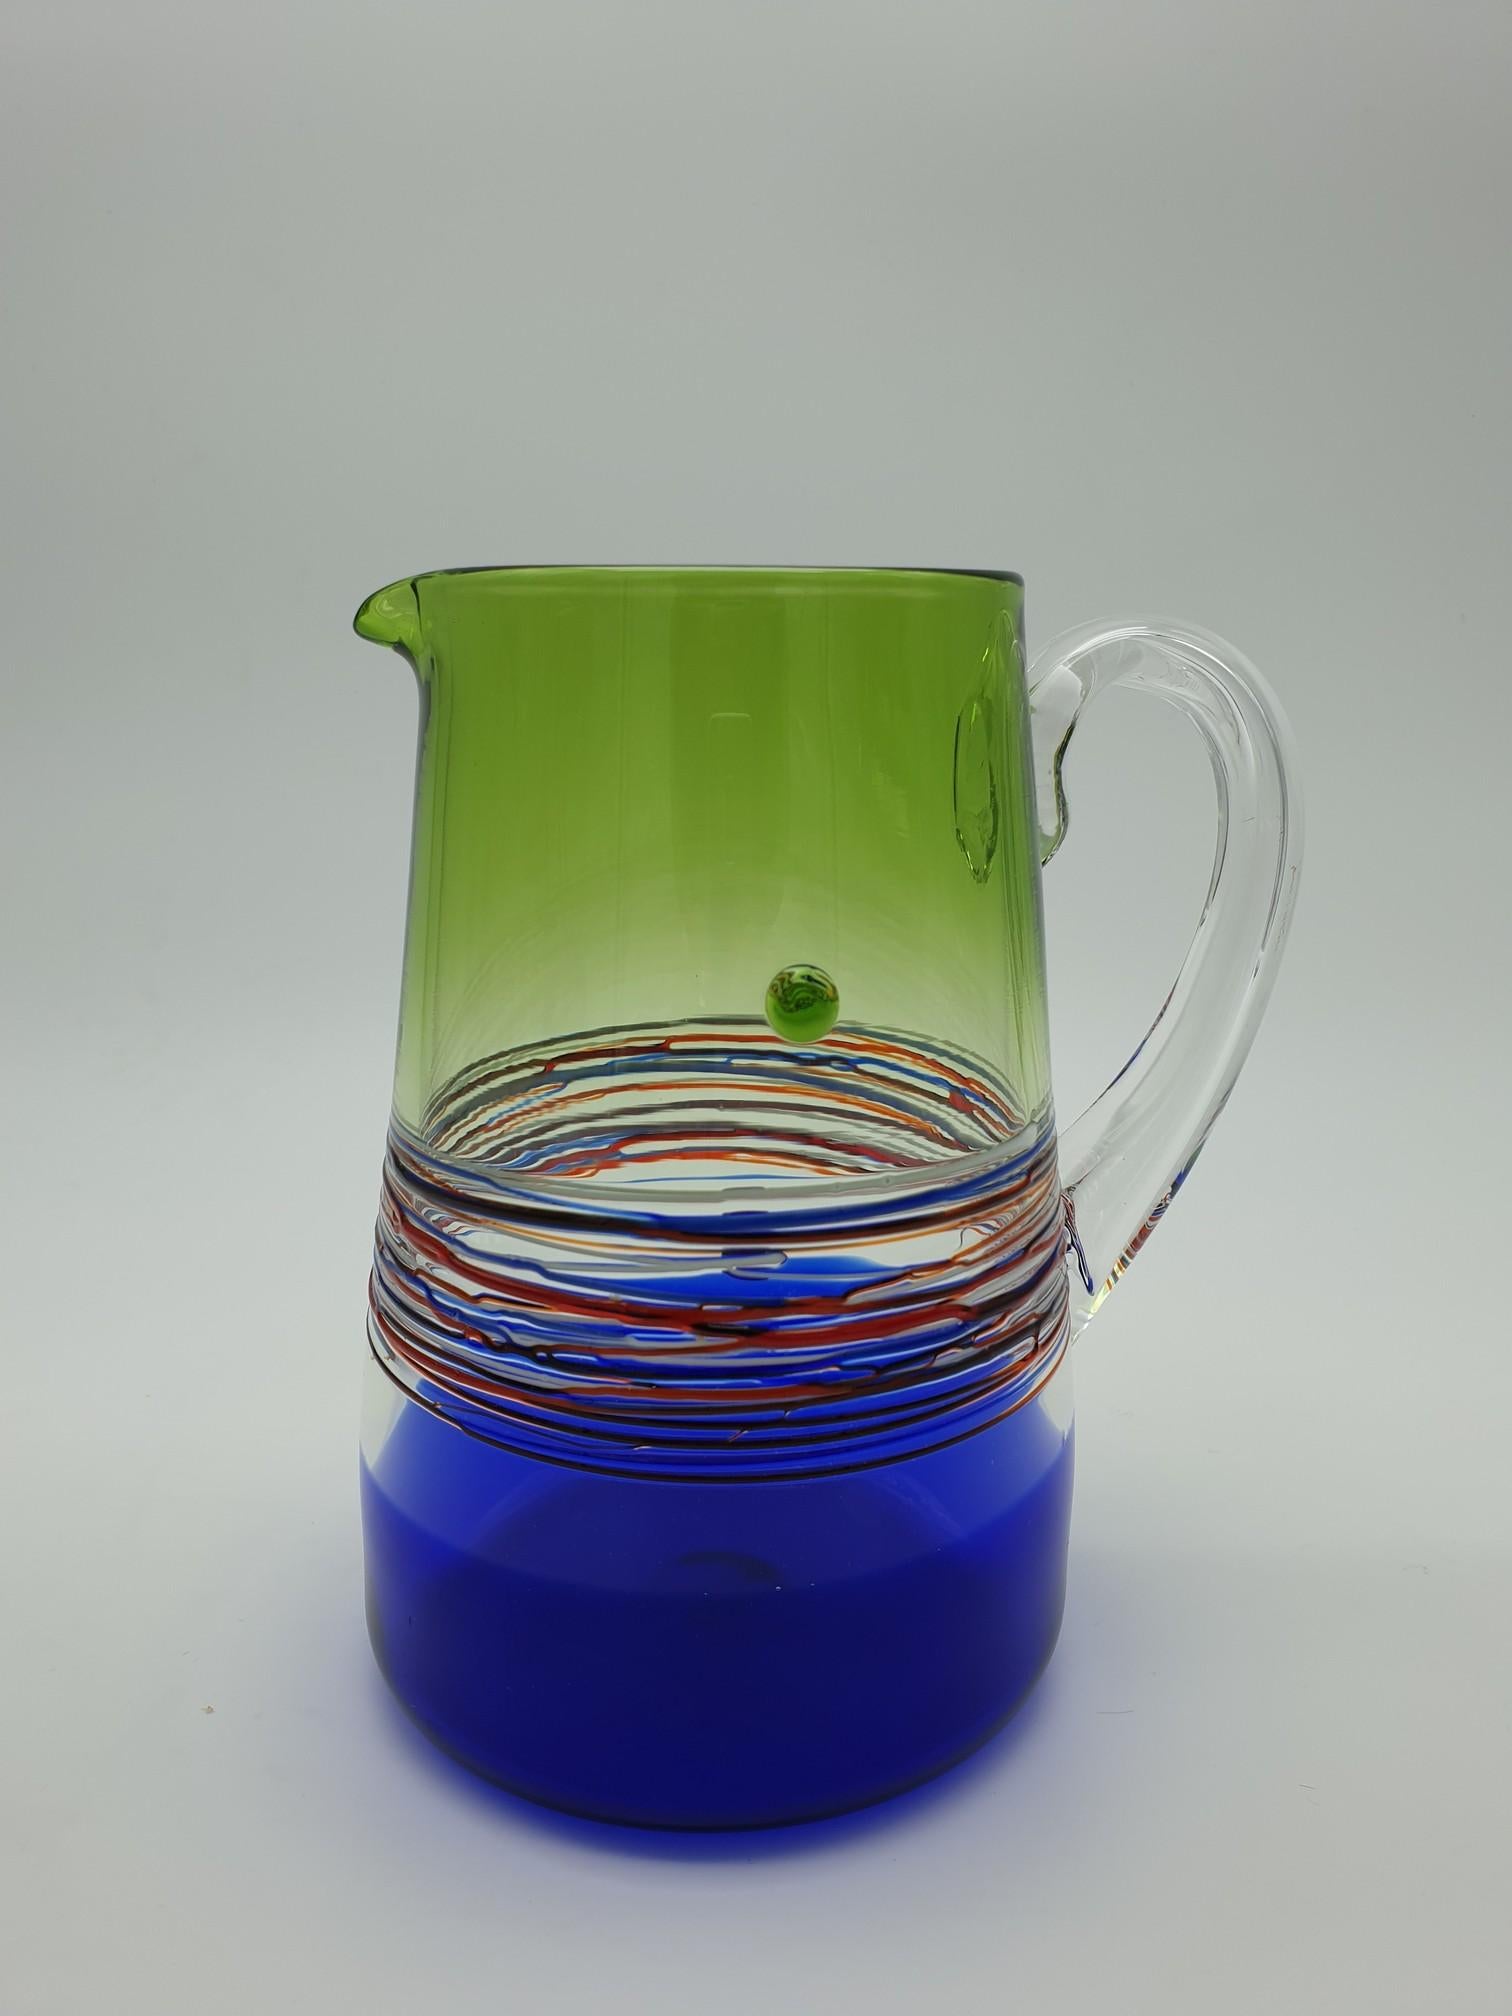 Modern colorful Murano glass pitcher or jug made by Gino Cenedese e Figlio in the late 1990s. This beautiful pitcher has been carefully handmade and features a clear handle and colorful splashes of bright green color on the top and royal blue on the